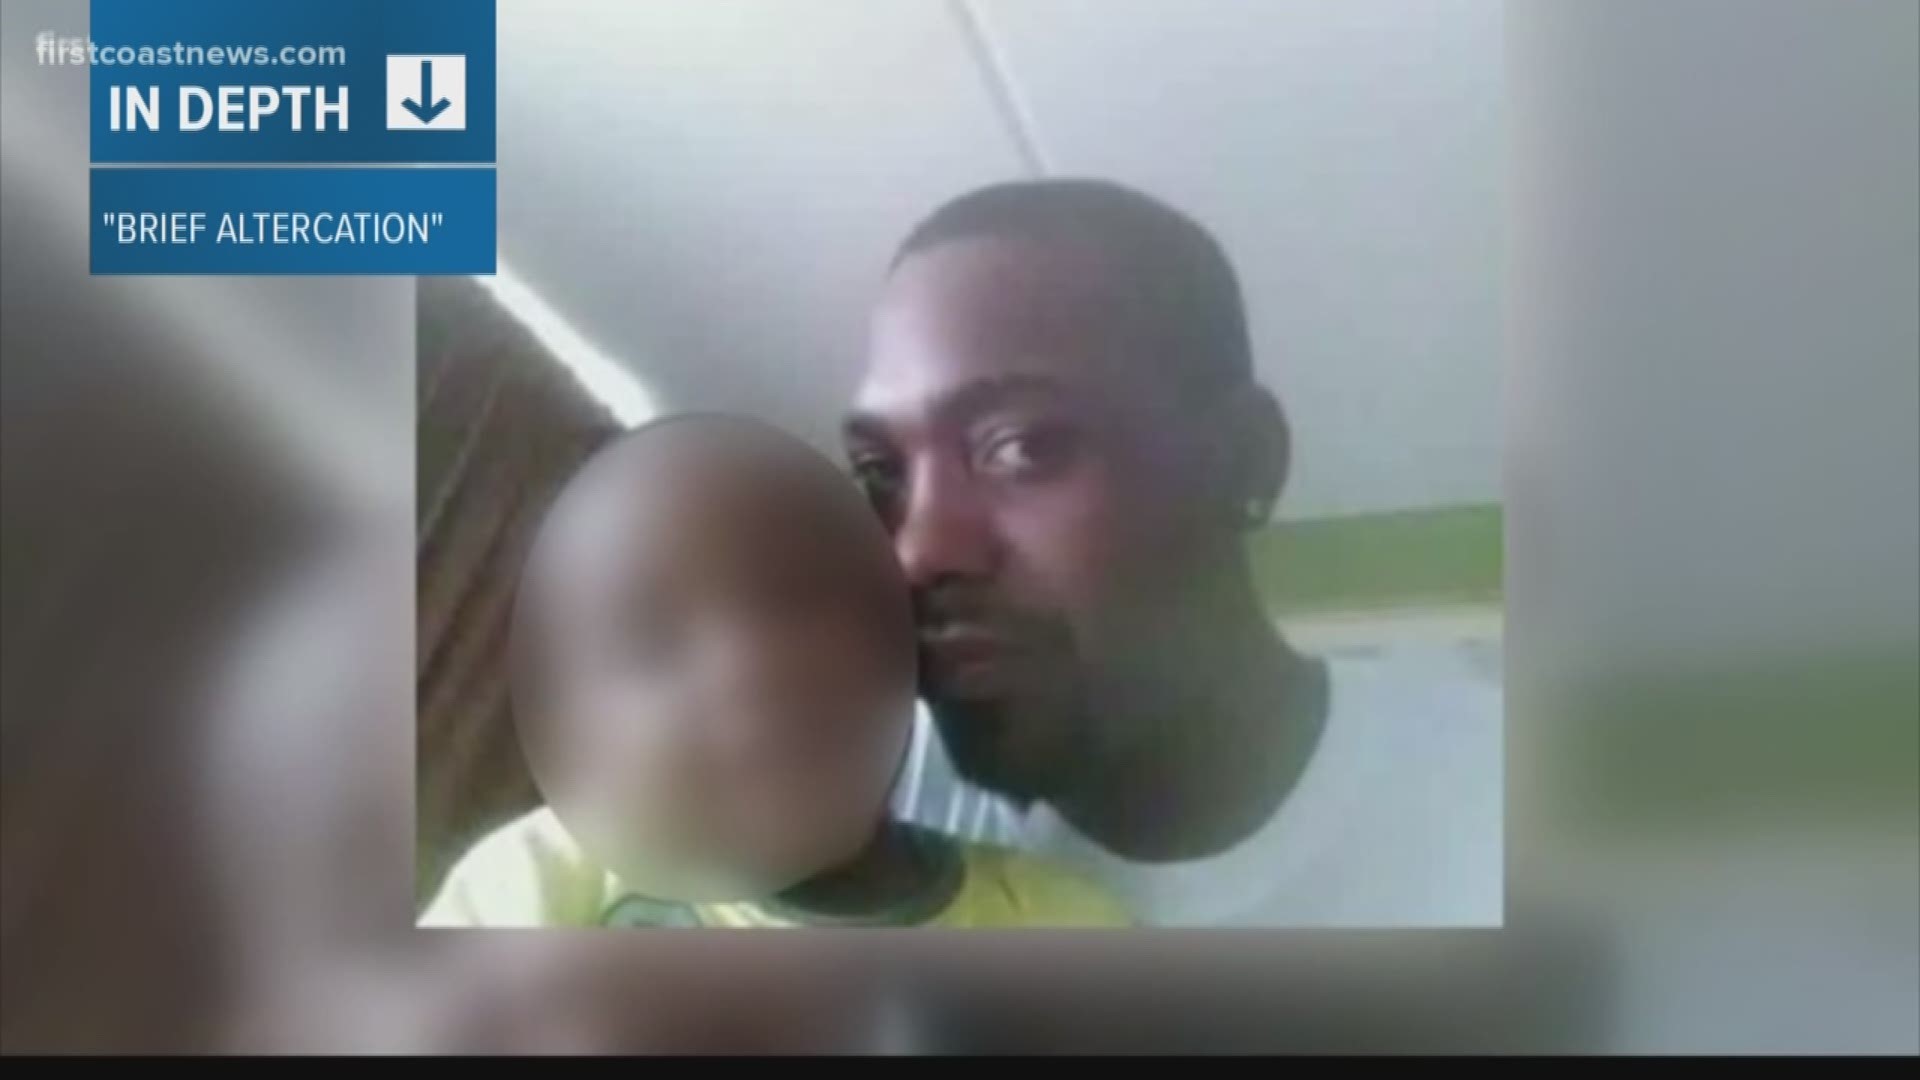 A community mourns after an unarmed man was shot and killed by police in Kingsland, GA.